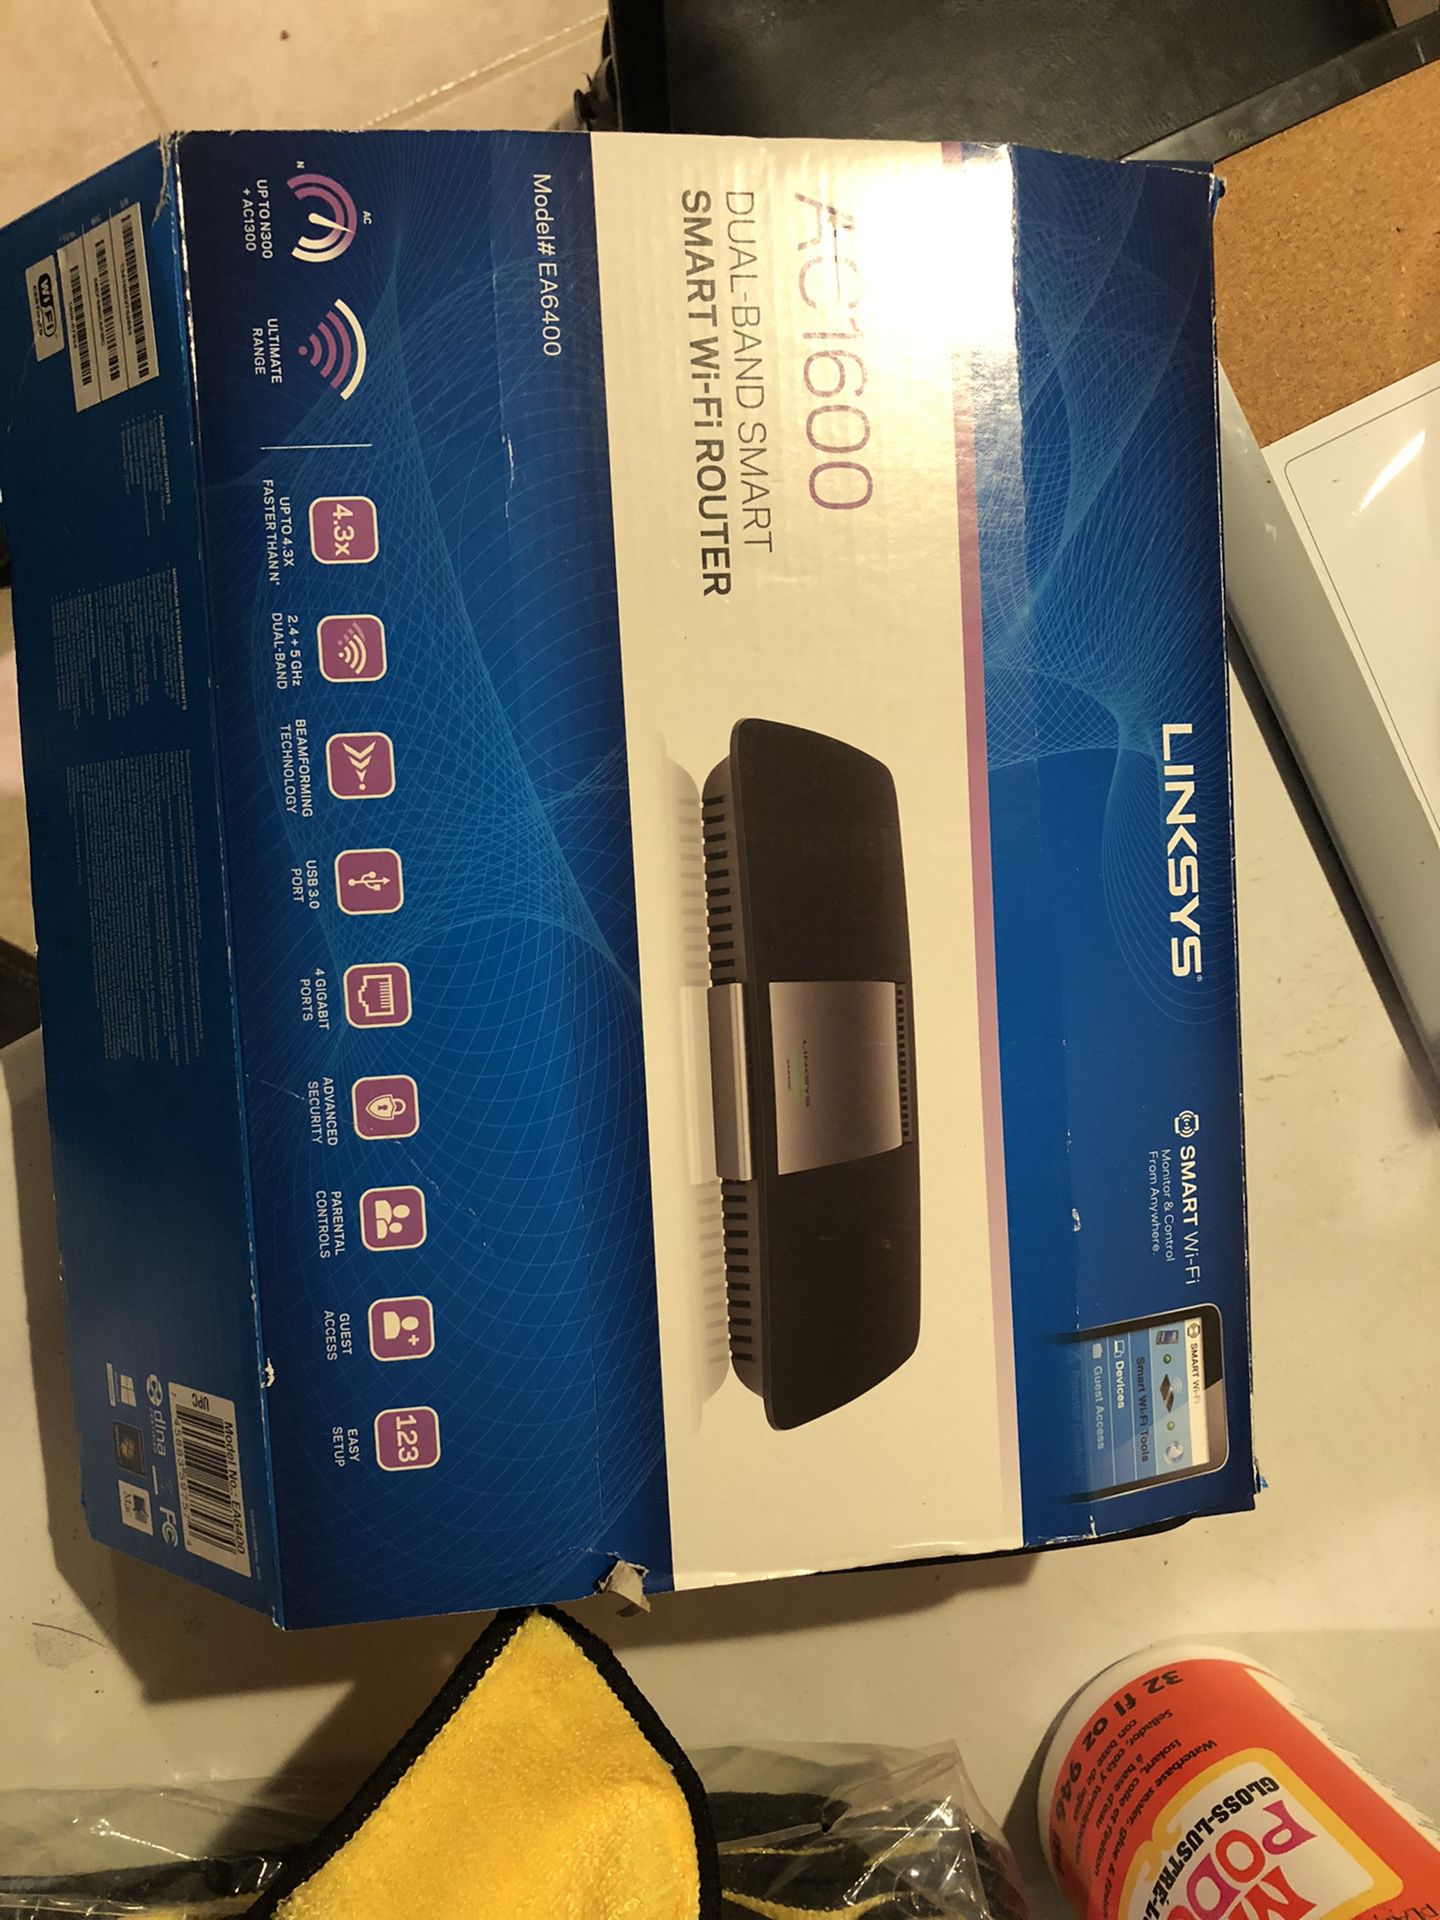 Linksys AC1600 router